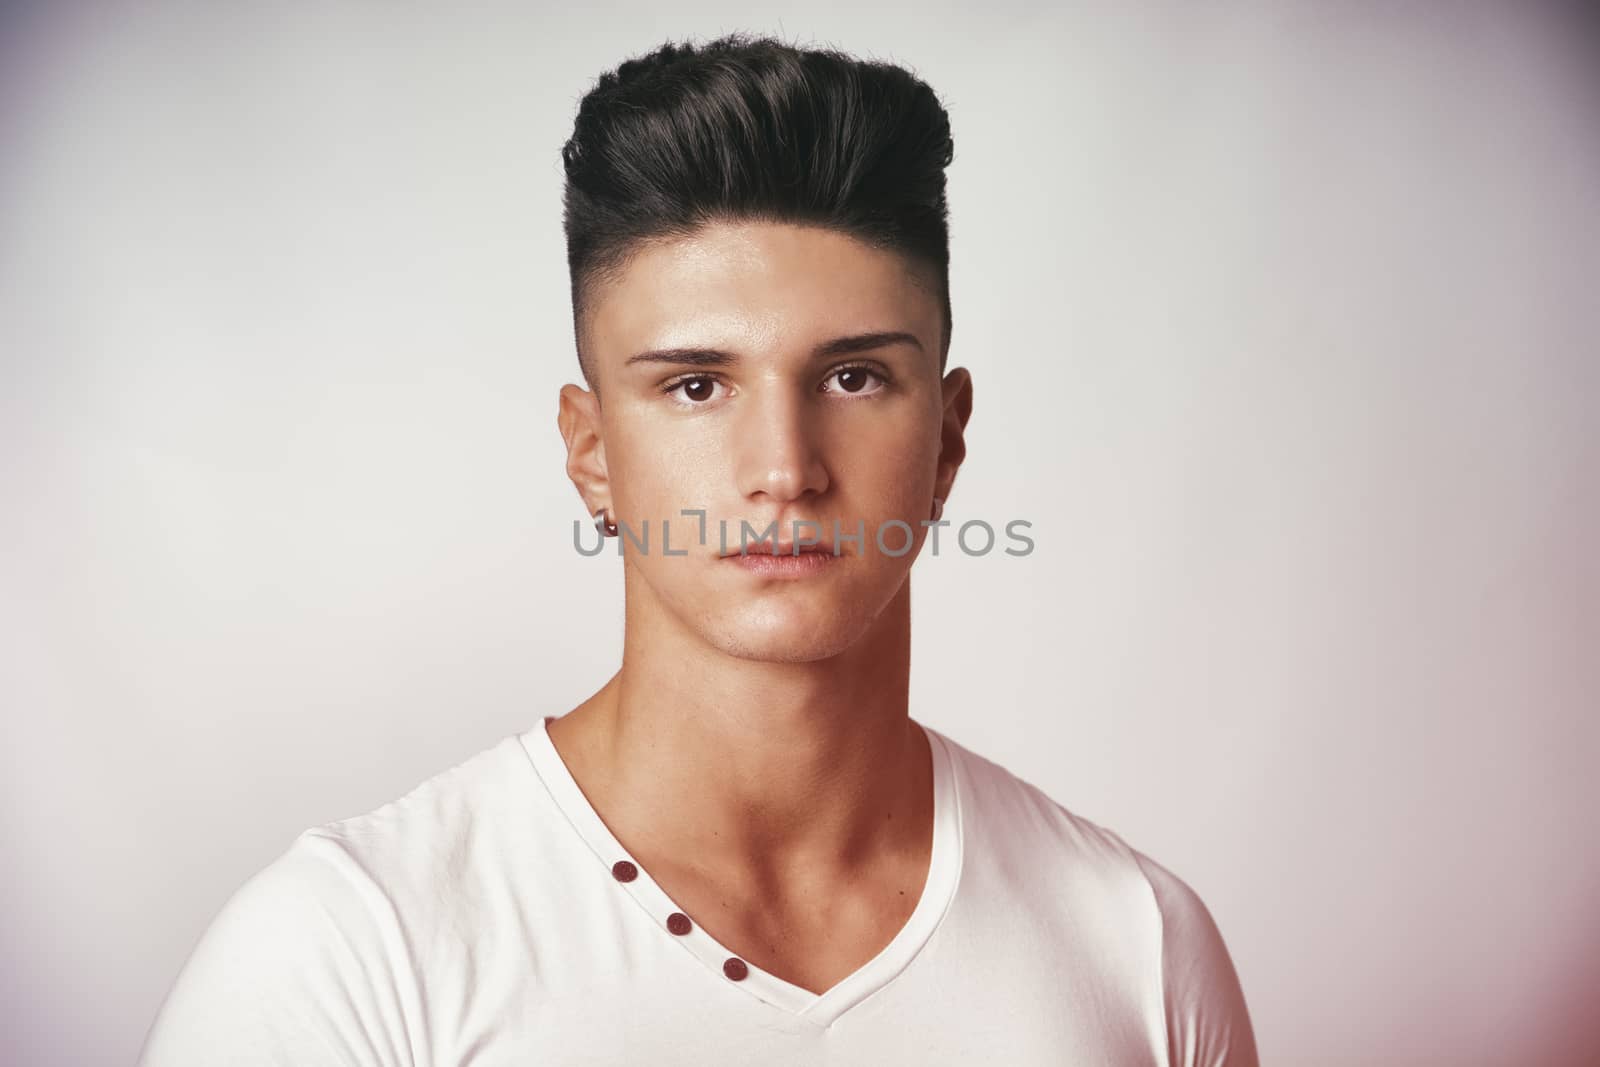 Head and shoulders portrait of handsome young man on light background looking at camera